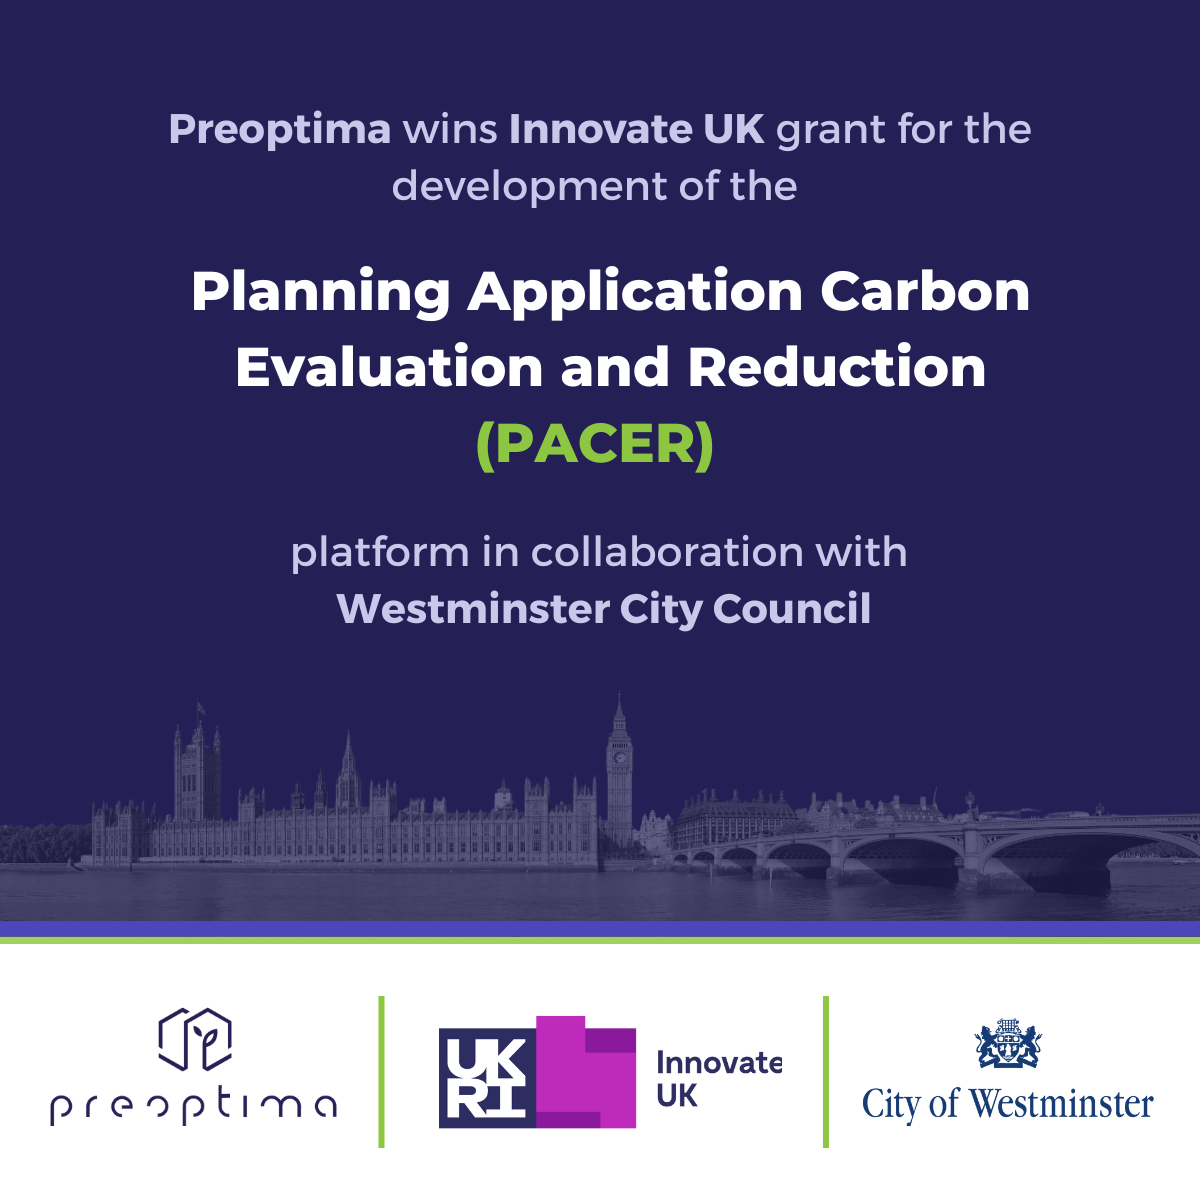 Planning Application Carbon Evaluation and Reduction (PACER)